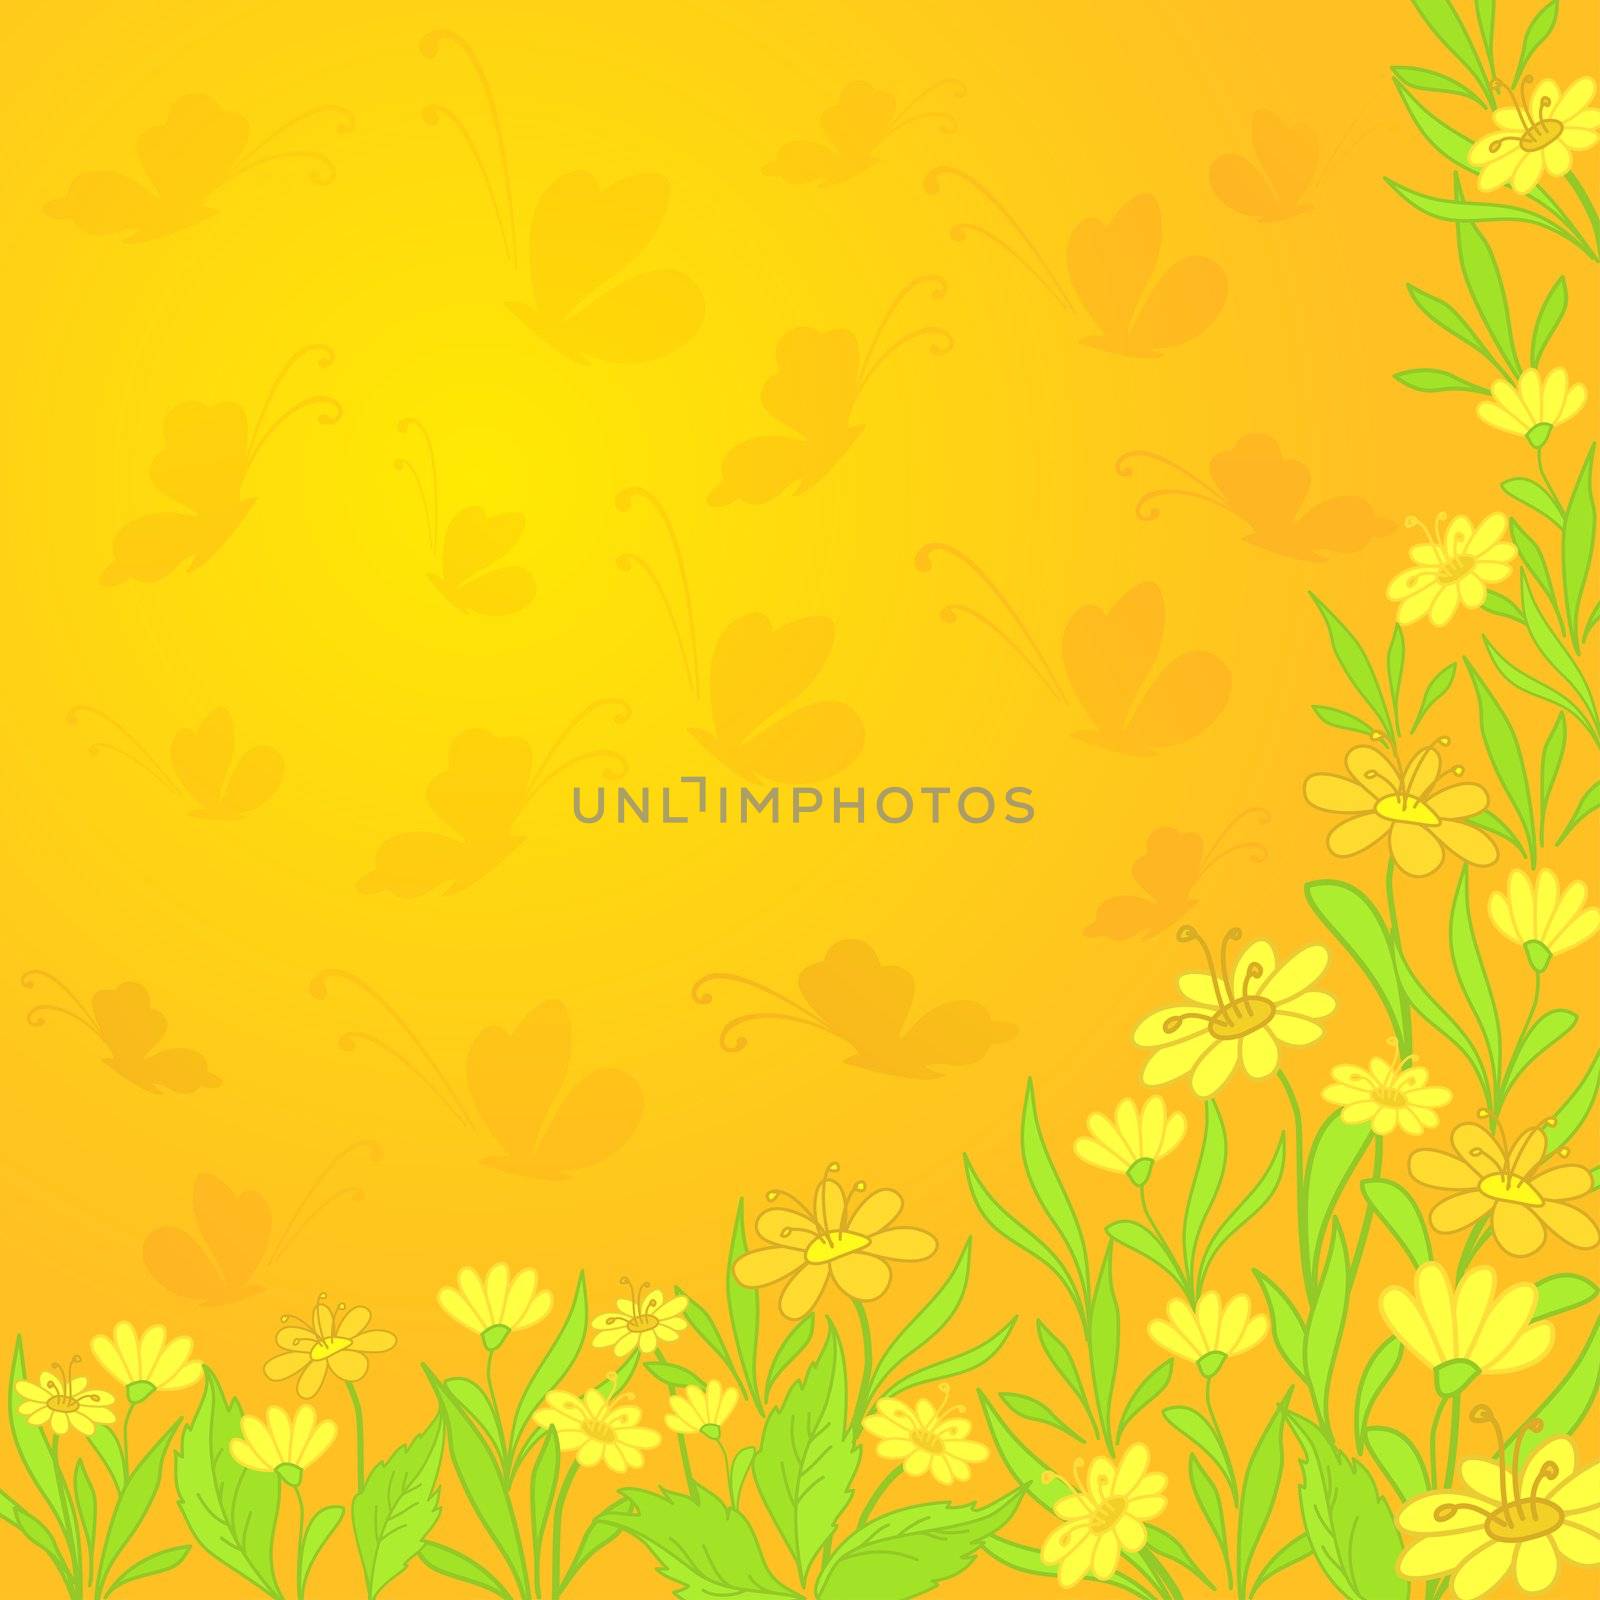 Abstract green and yellow vbackground with flowers and butterflies